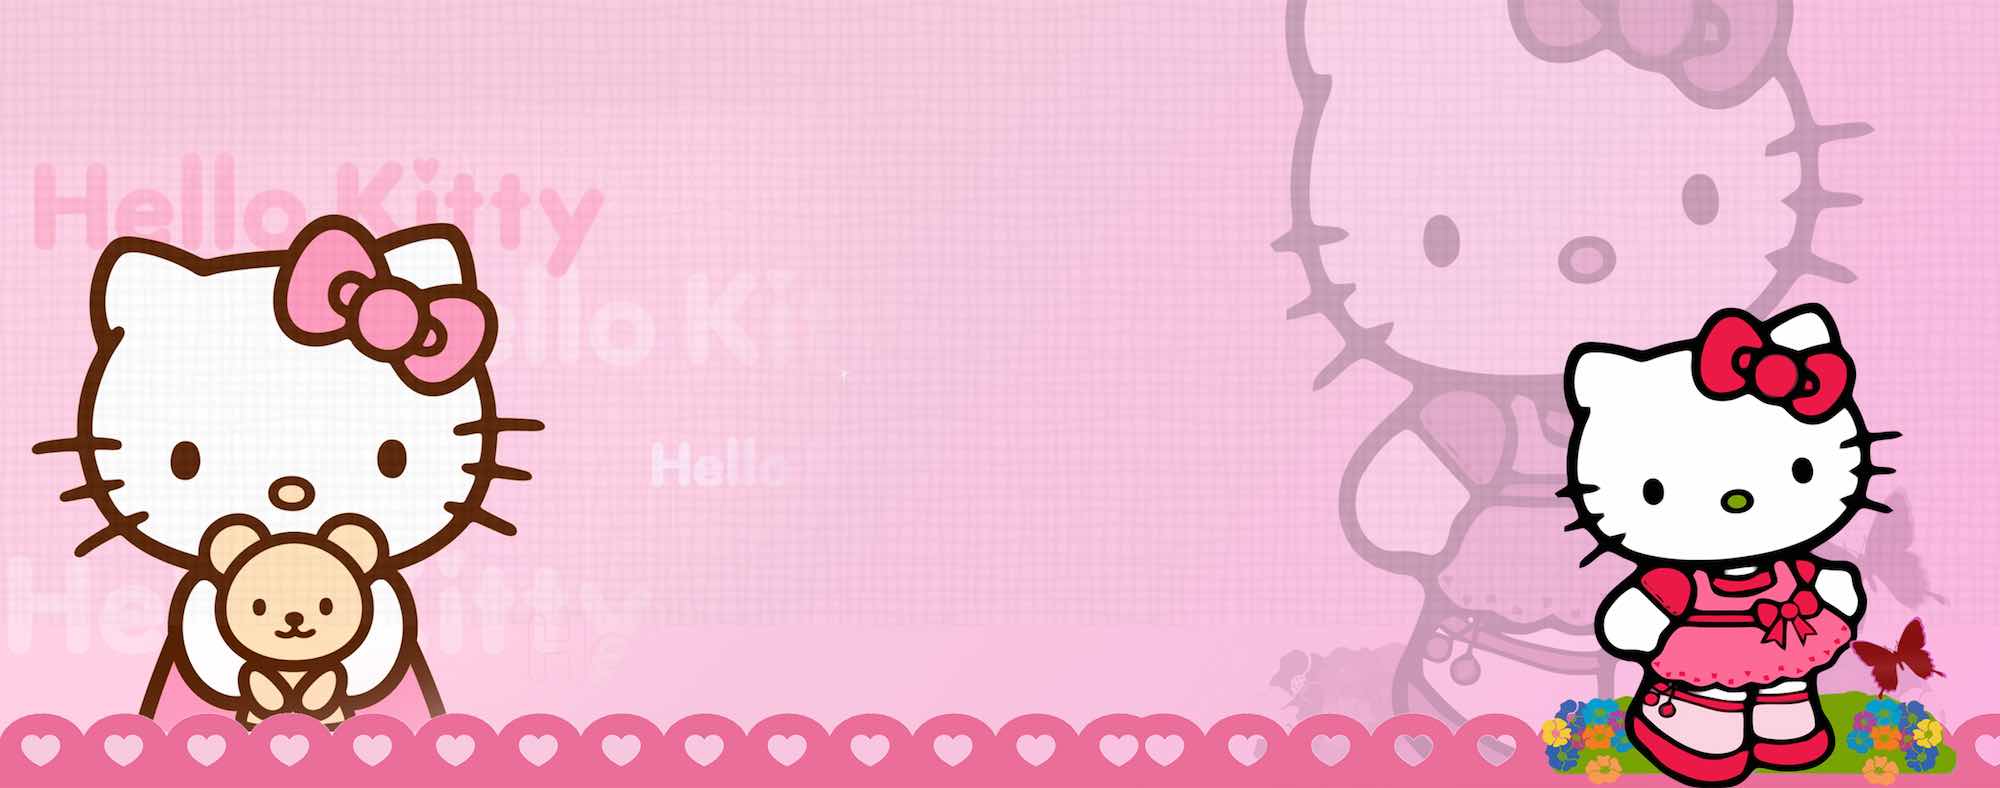 buy hello kitty products online 1